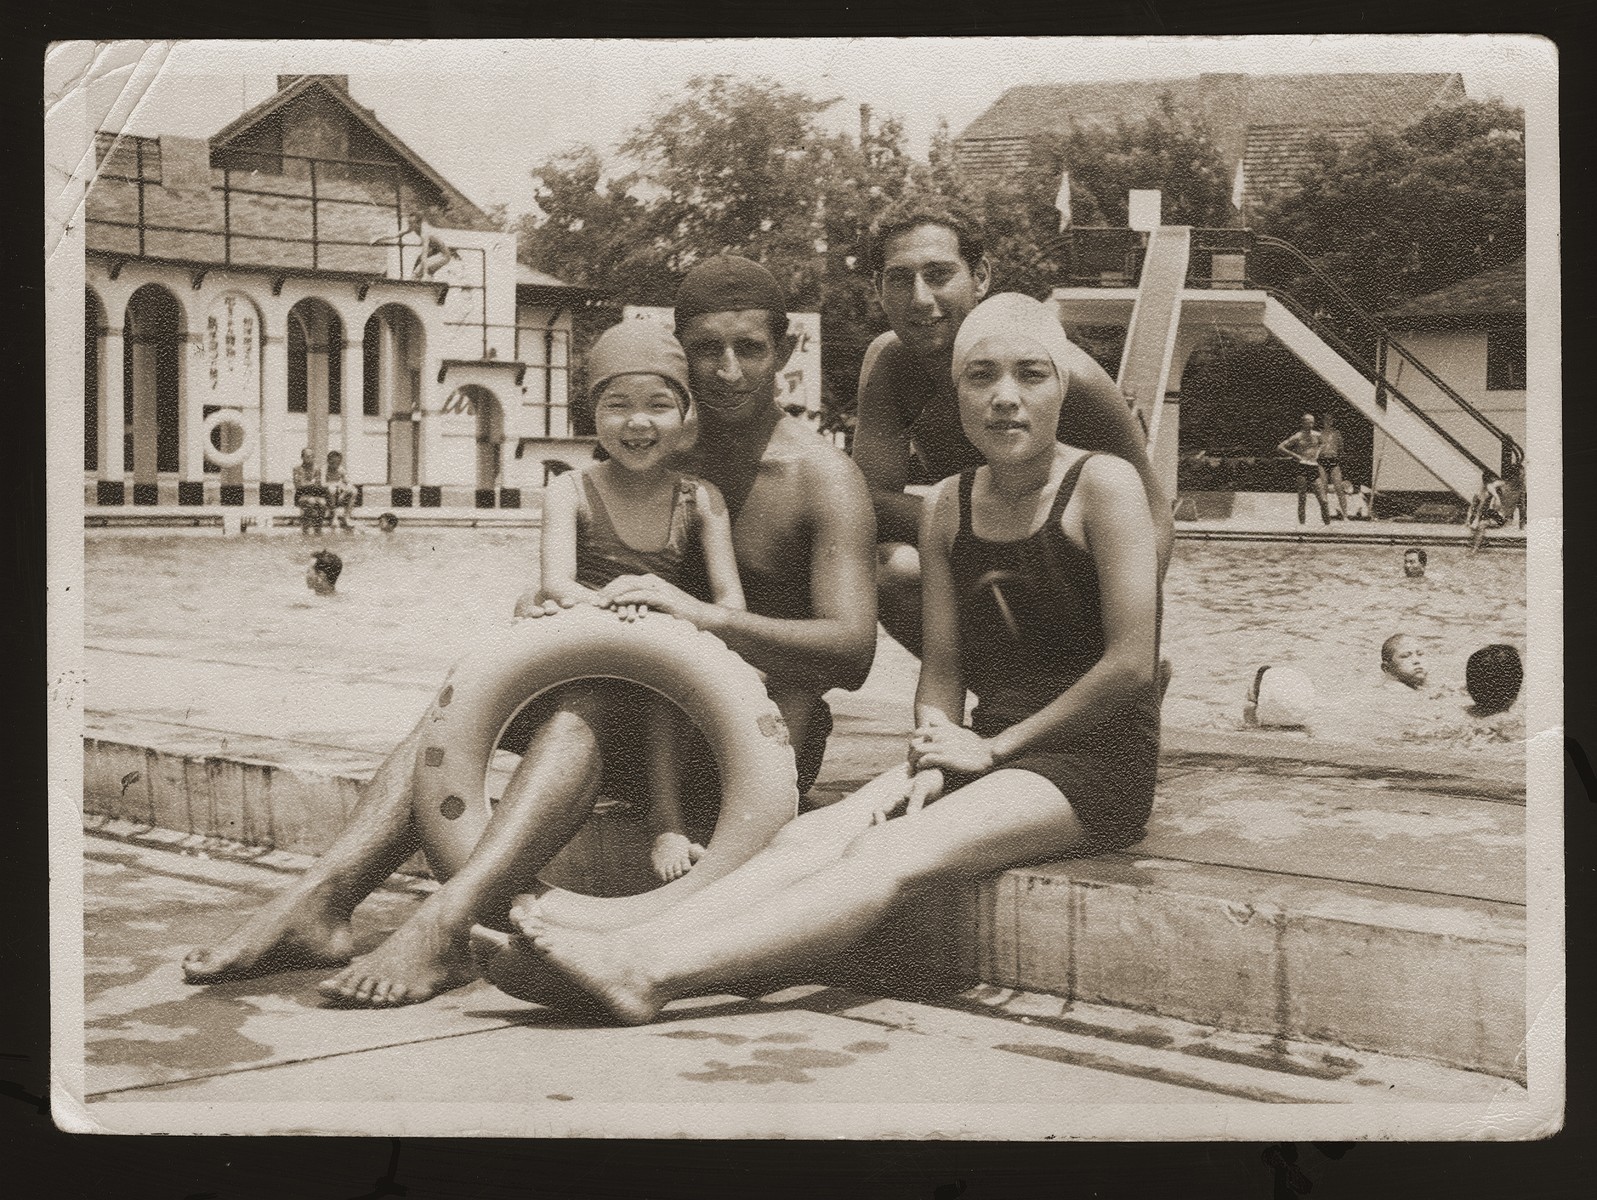 Peter Victor (second from right), a Jewish refugee from Berlin, with his friends Ely, Mrs. Oda, and her daughter at the Hongkew Park swimming pool.  

Hongkew Park was a Japanese country club where Victor found employment as a lifeguard.